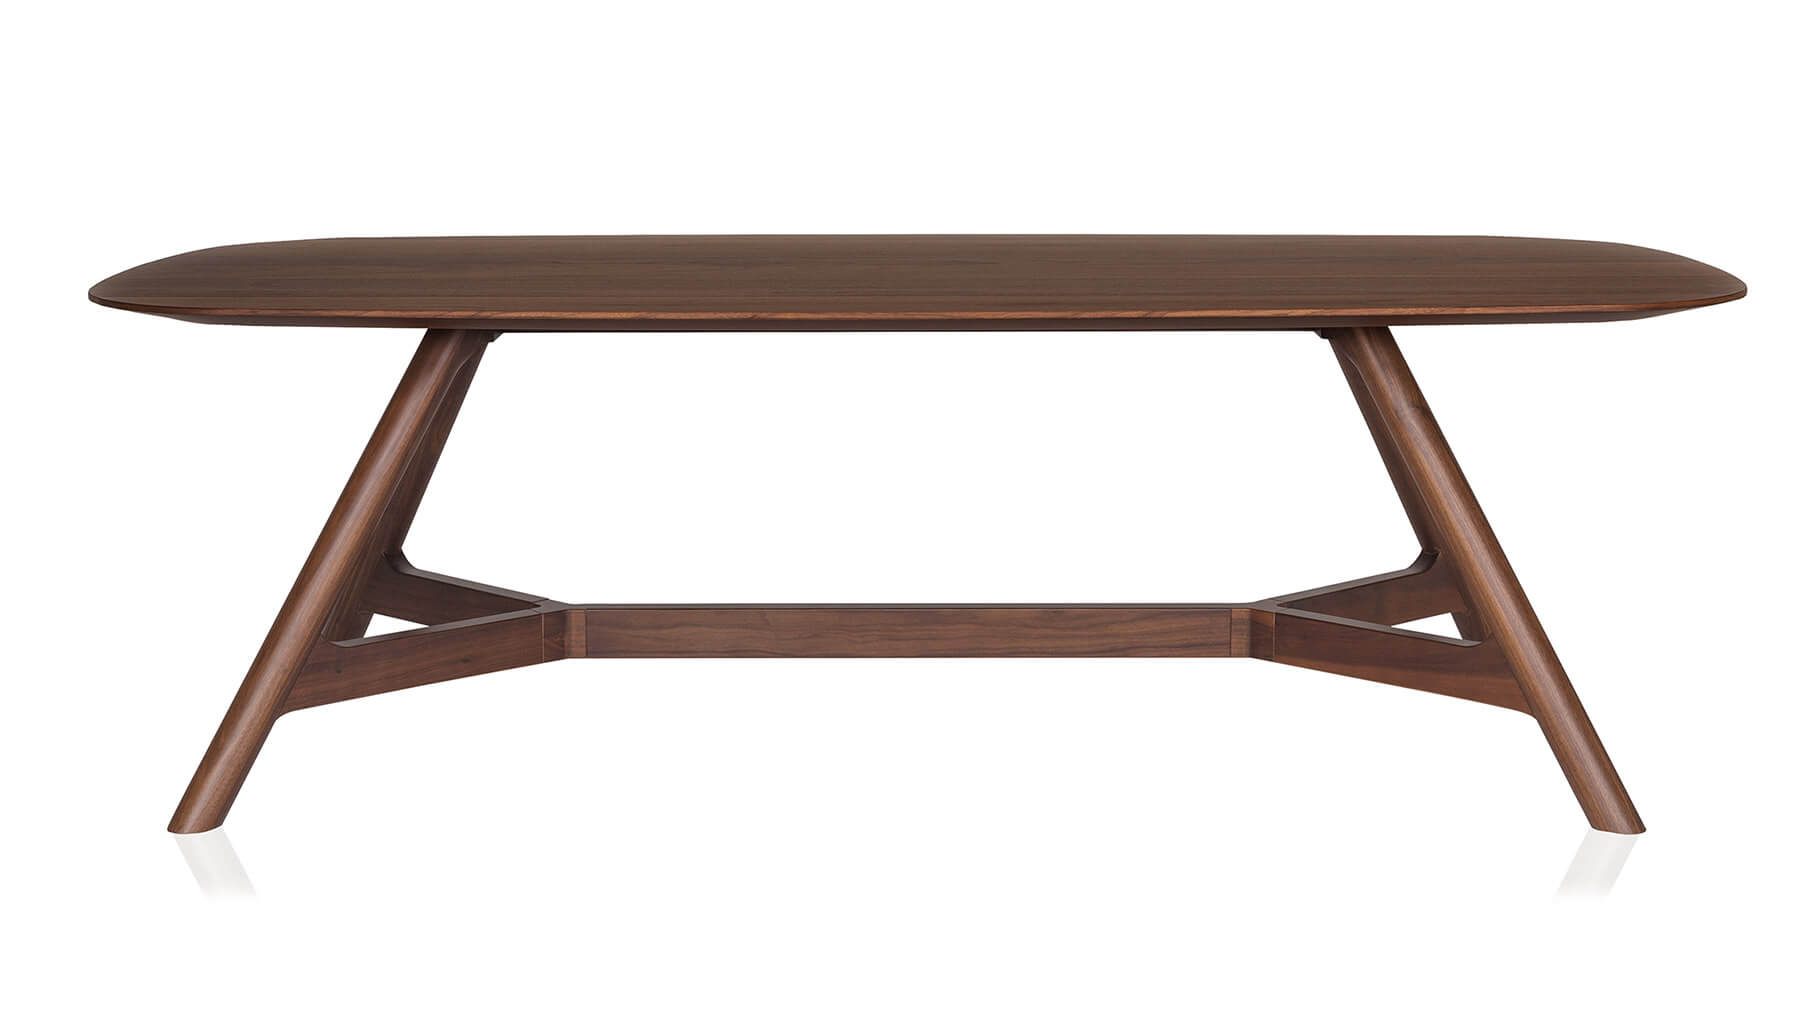 Kahal c 001 dining table with walnut top